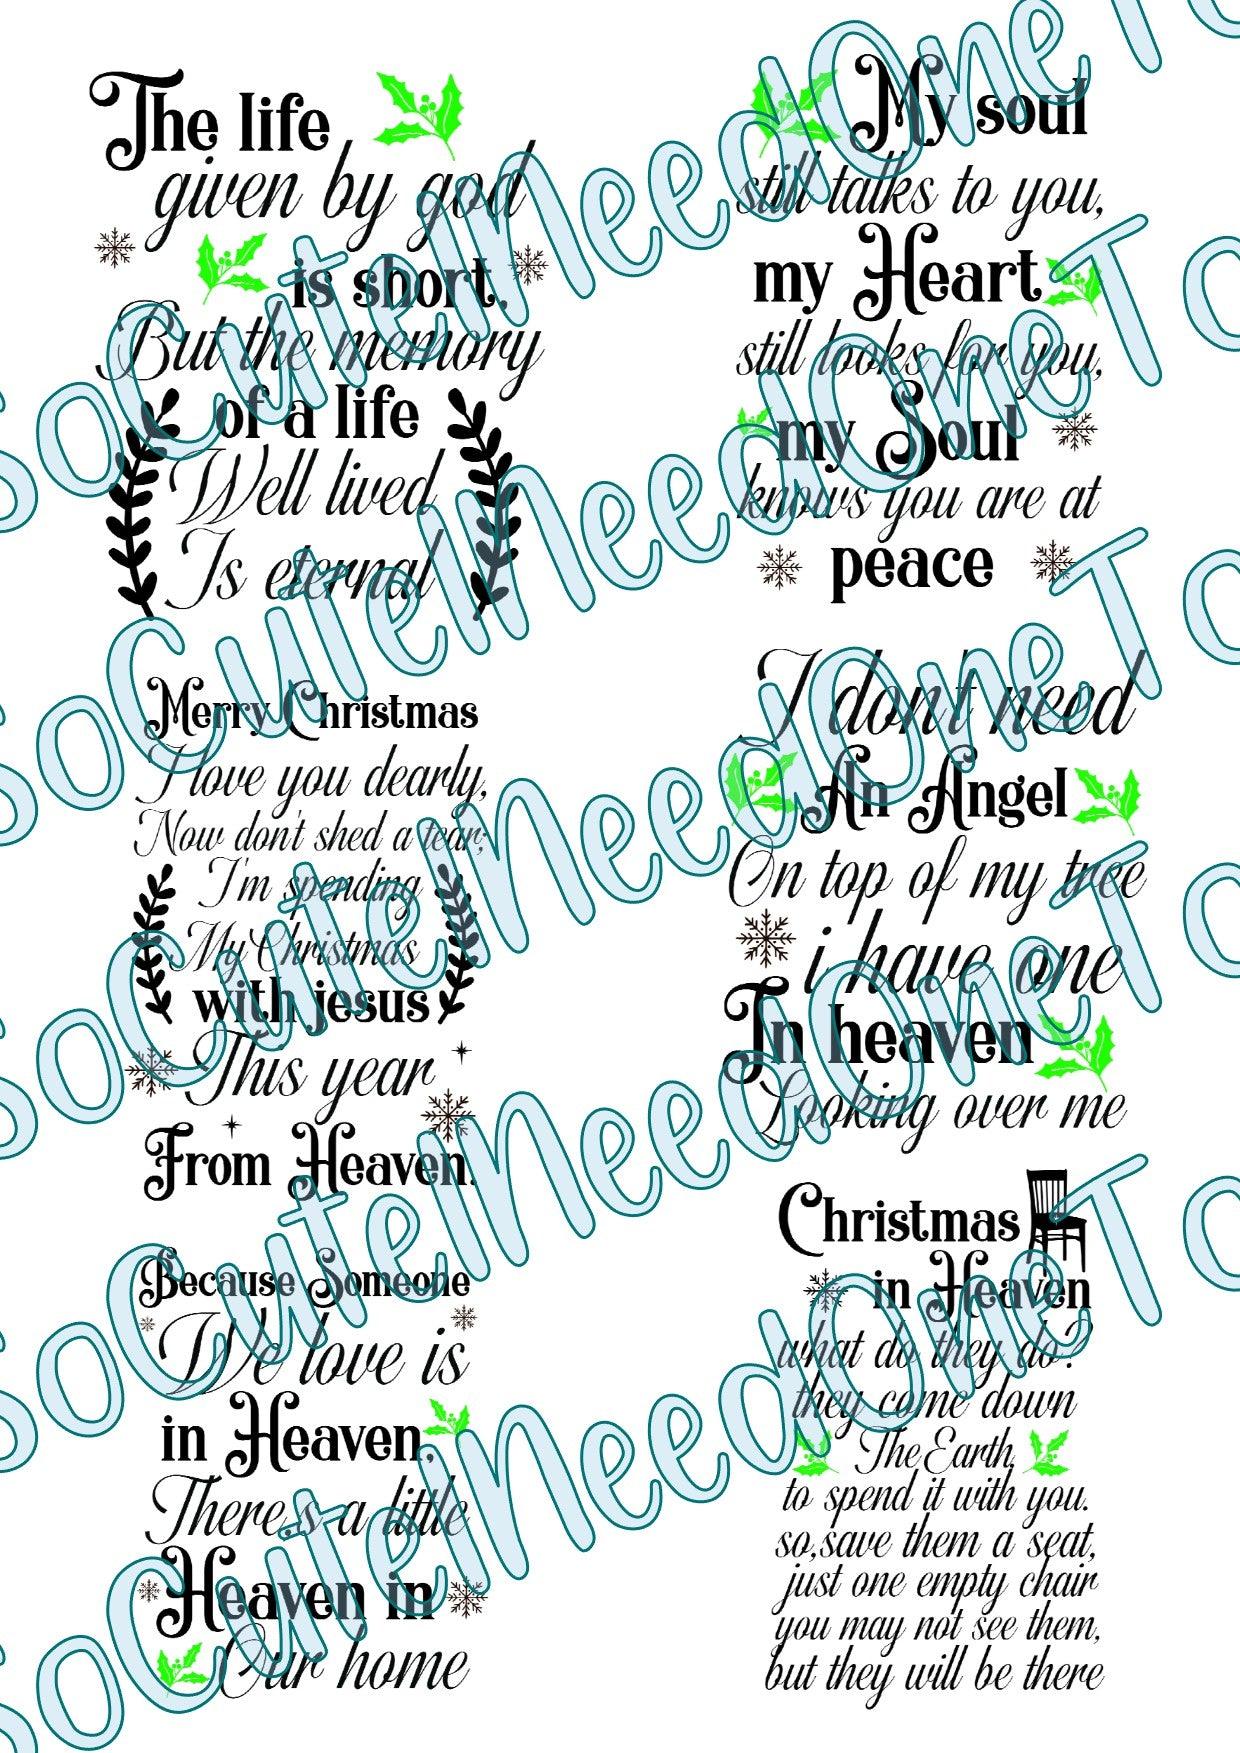 Heaven's Chair - On Clear/White Waterslide Paper - Ready To Use - SoCuteINeedOneToo